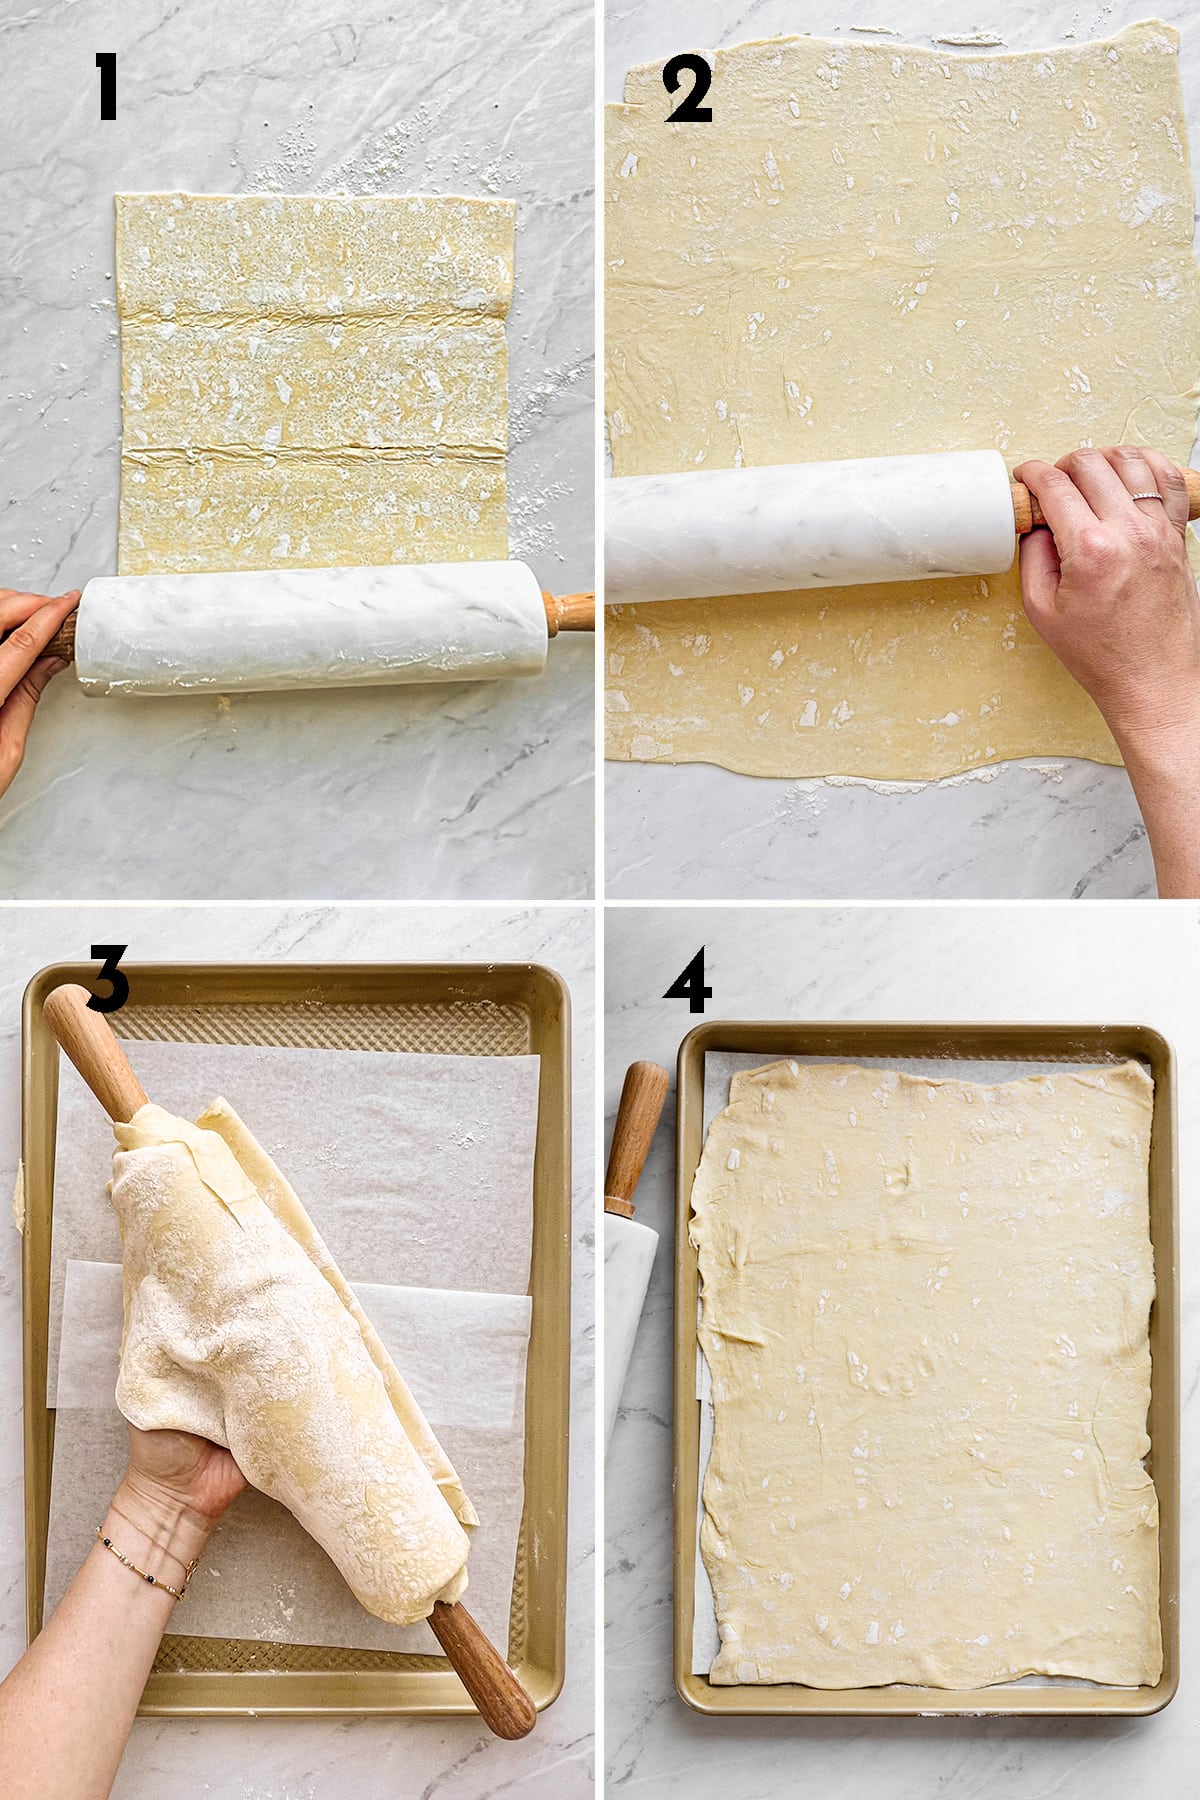 Steps to make Apple Galette with Puff Pastry, roll out puff pastry sheet into a rectangle, place on rolling pin and transfer to prepared baking sheet, refrigerate.